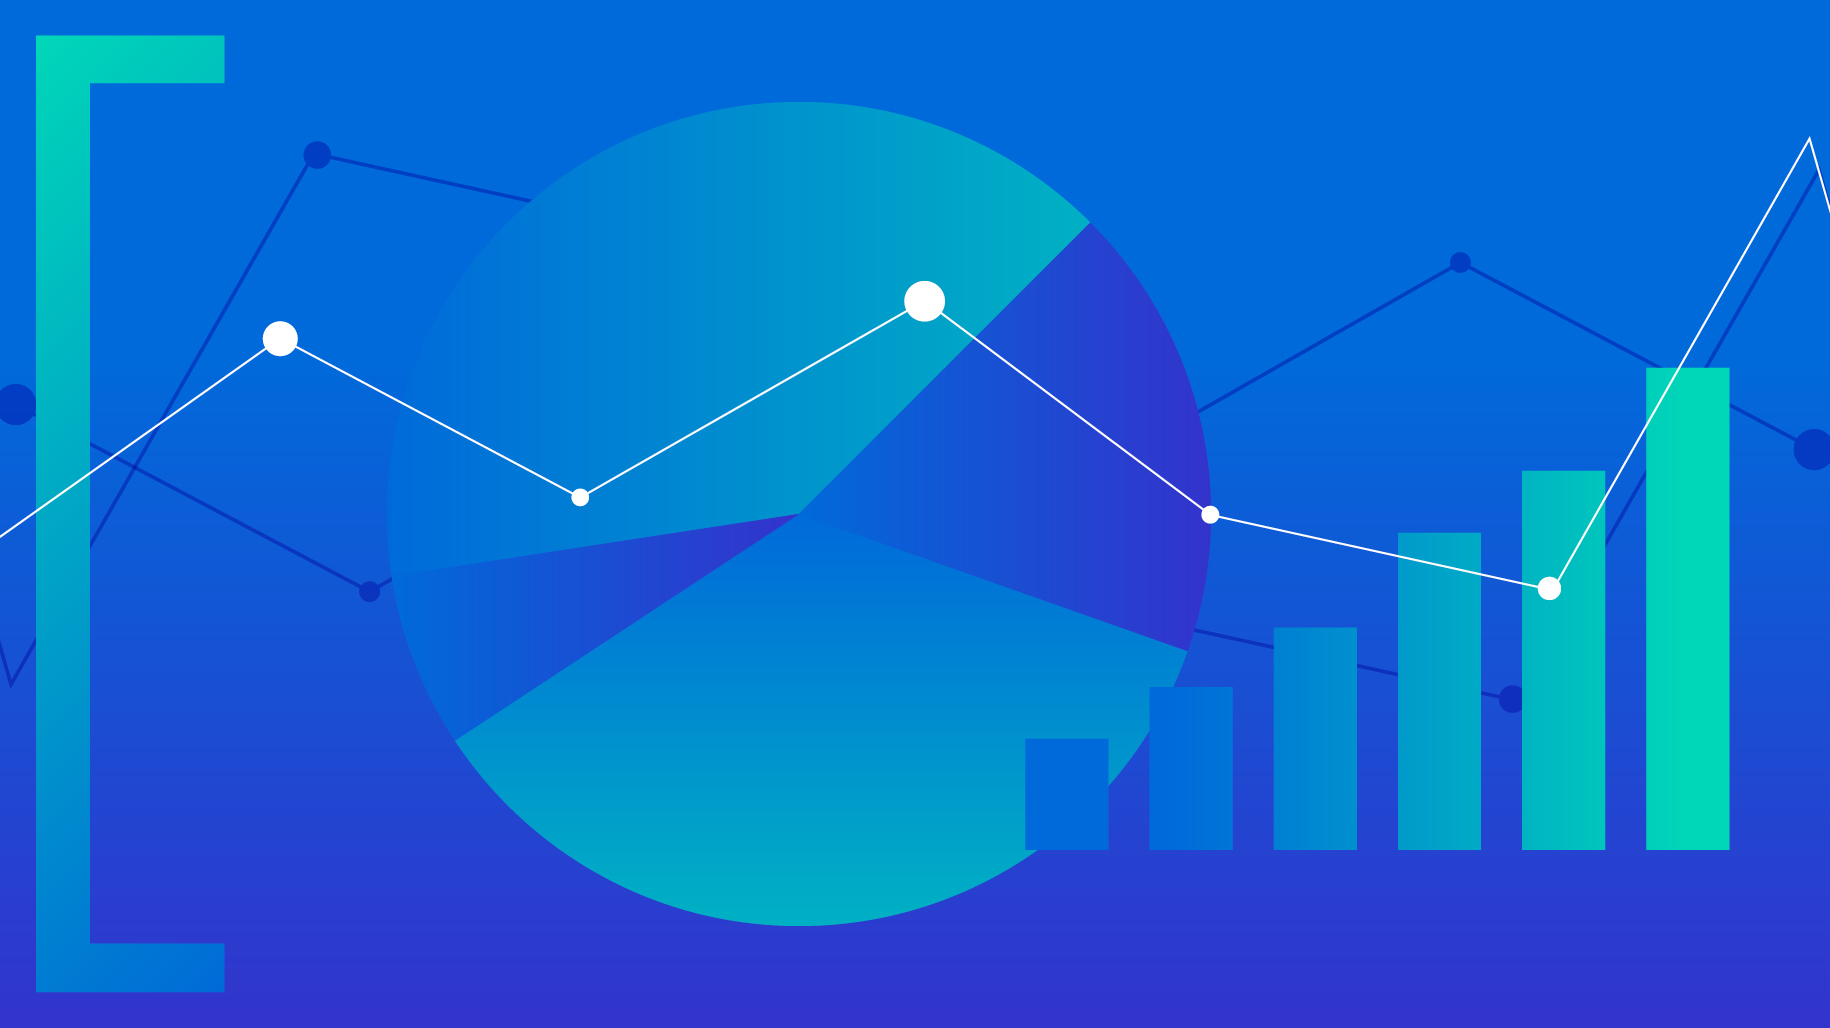 Data visualization allows marketers to quickly communicate key insights. Learn the importance of storytelling with data and how it can add immense value.